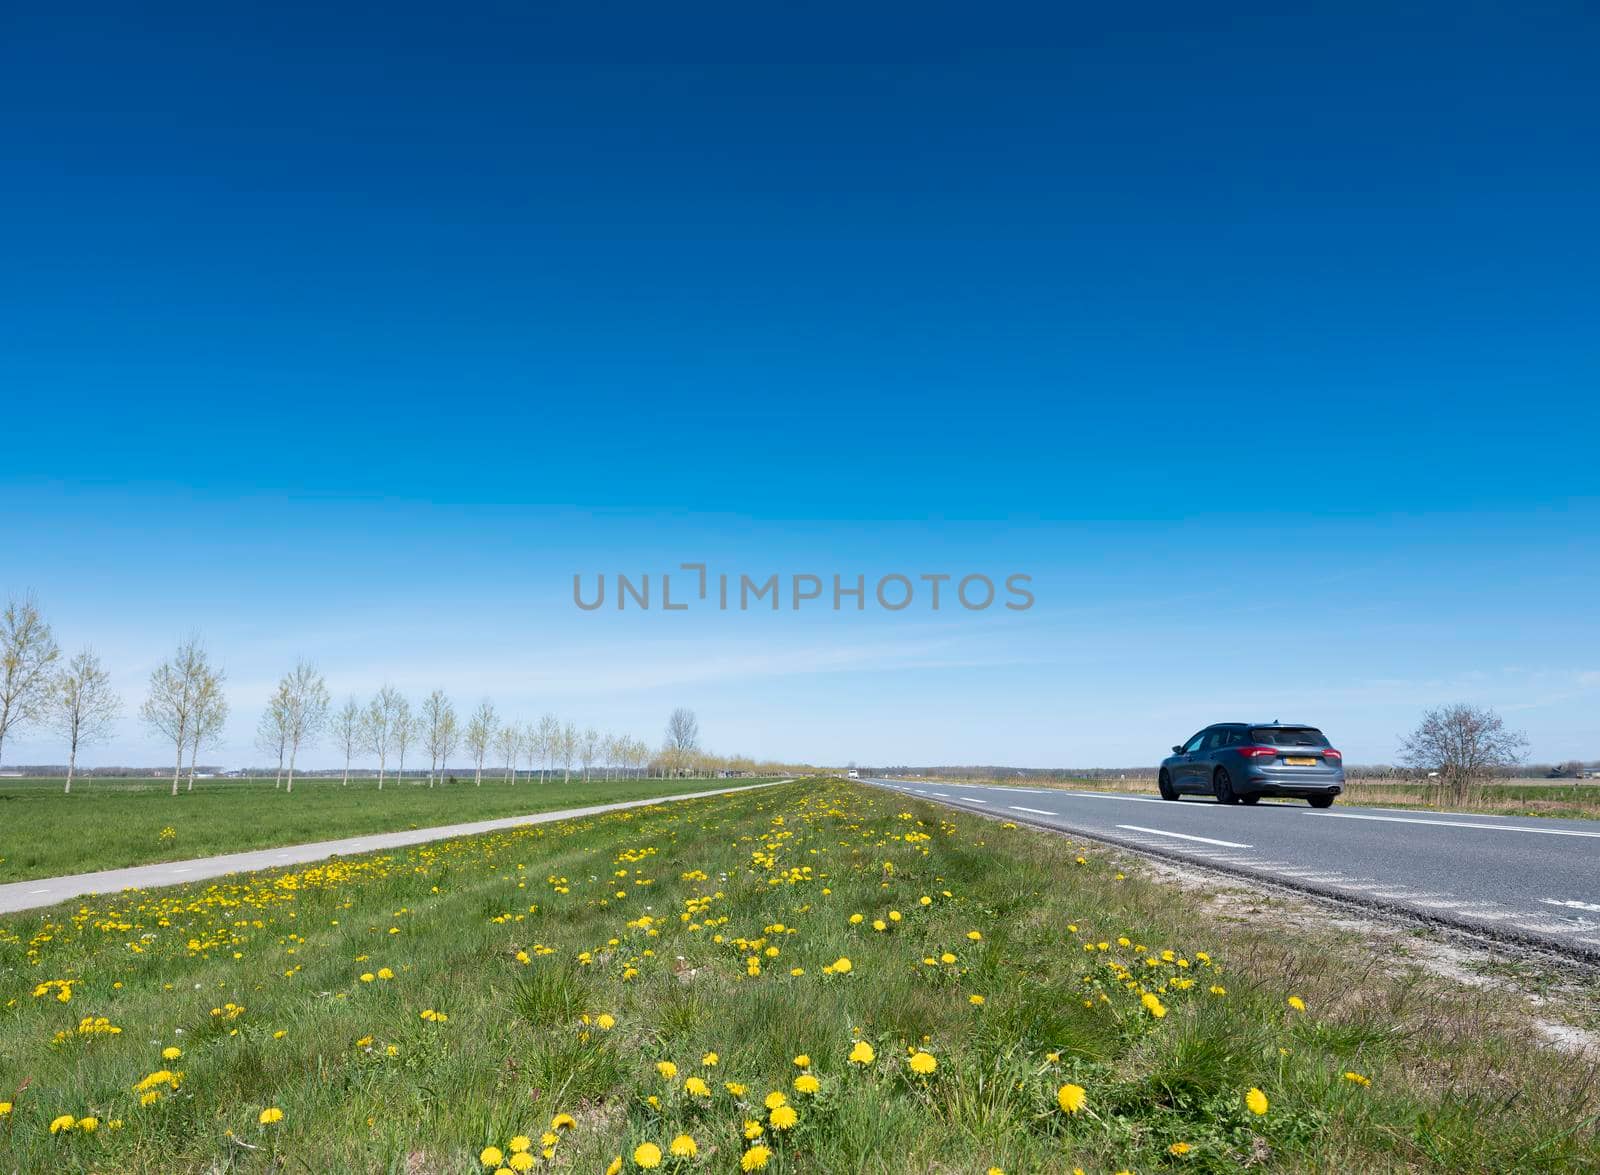 open spring landscape with road and car under blue sky in dutch province of flevoland near almere in the netherlands